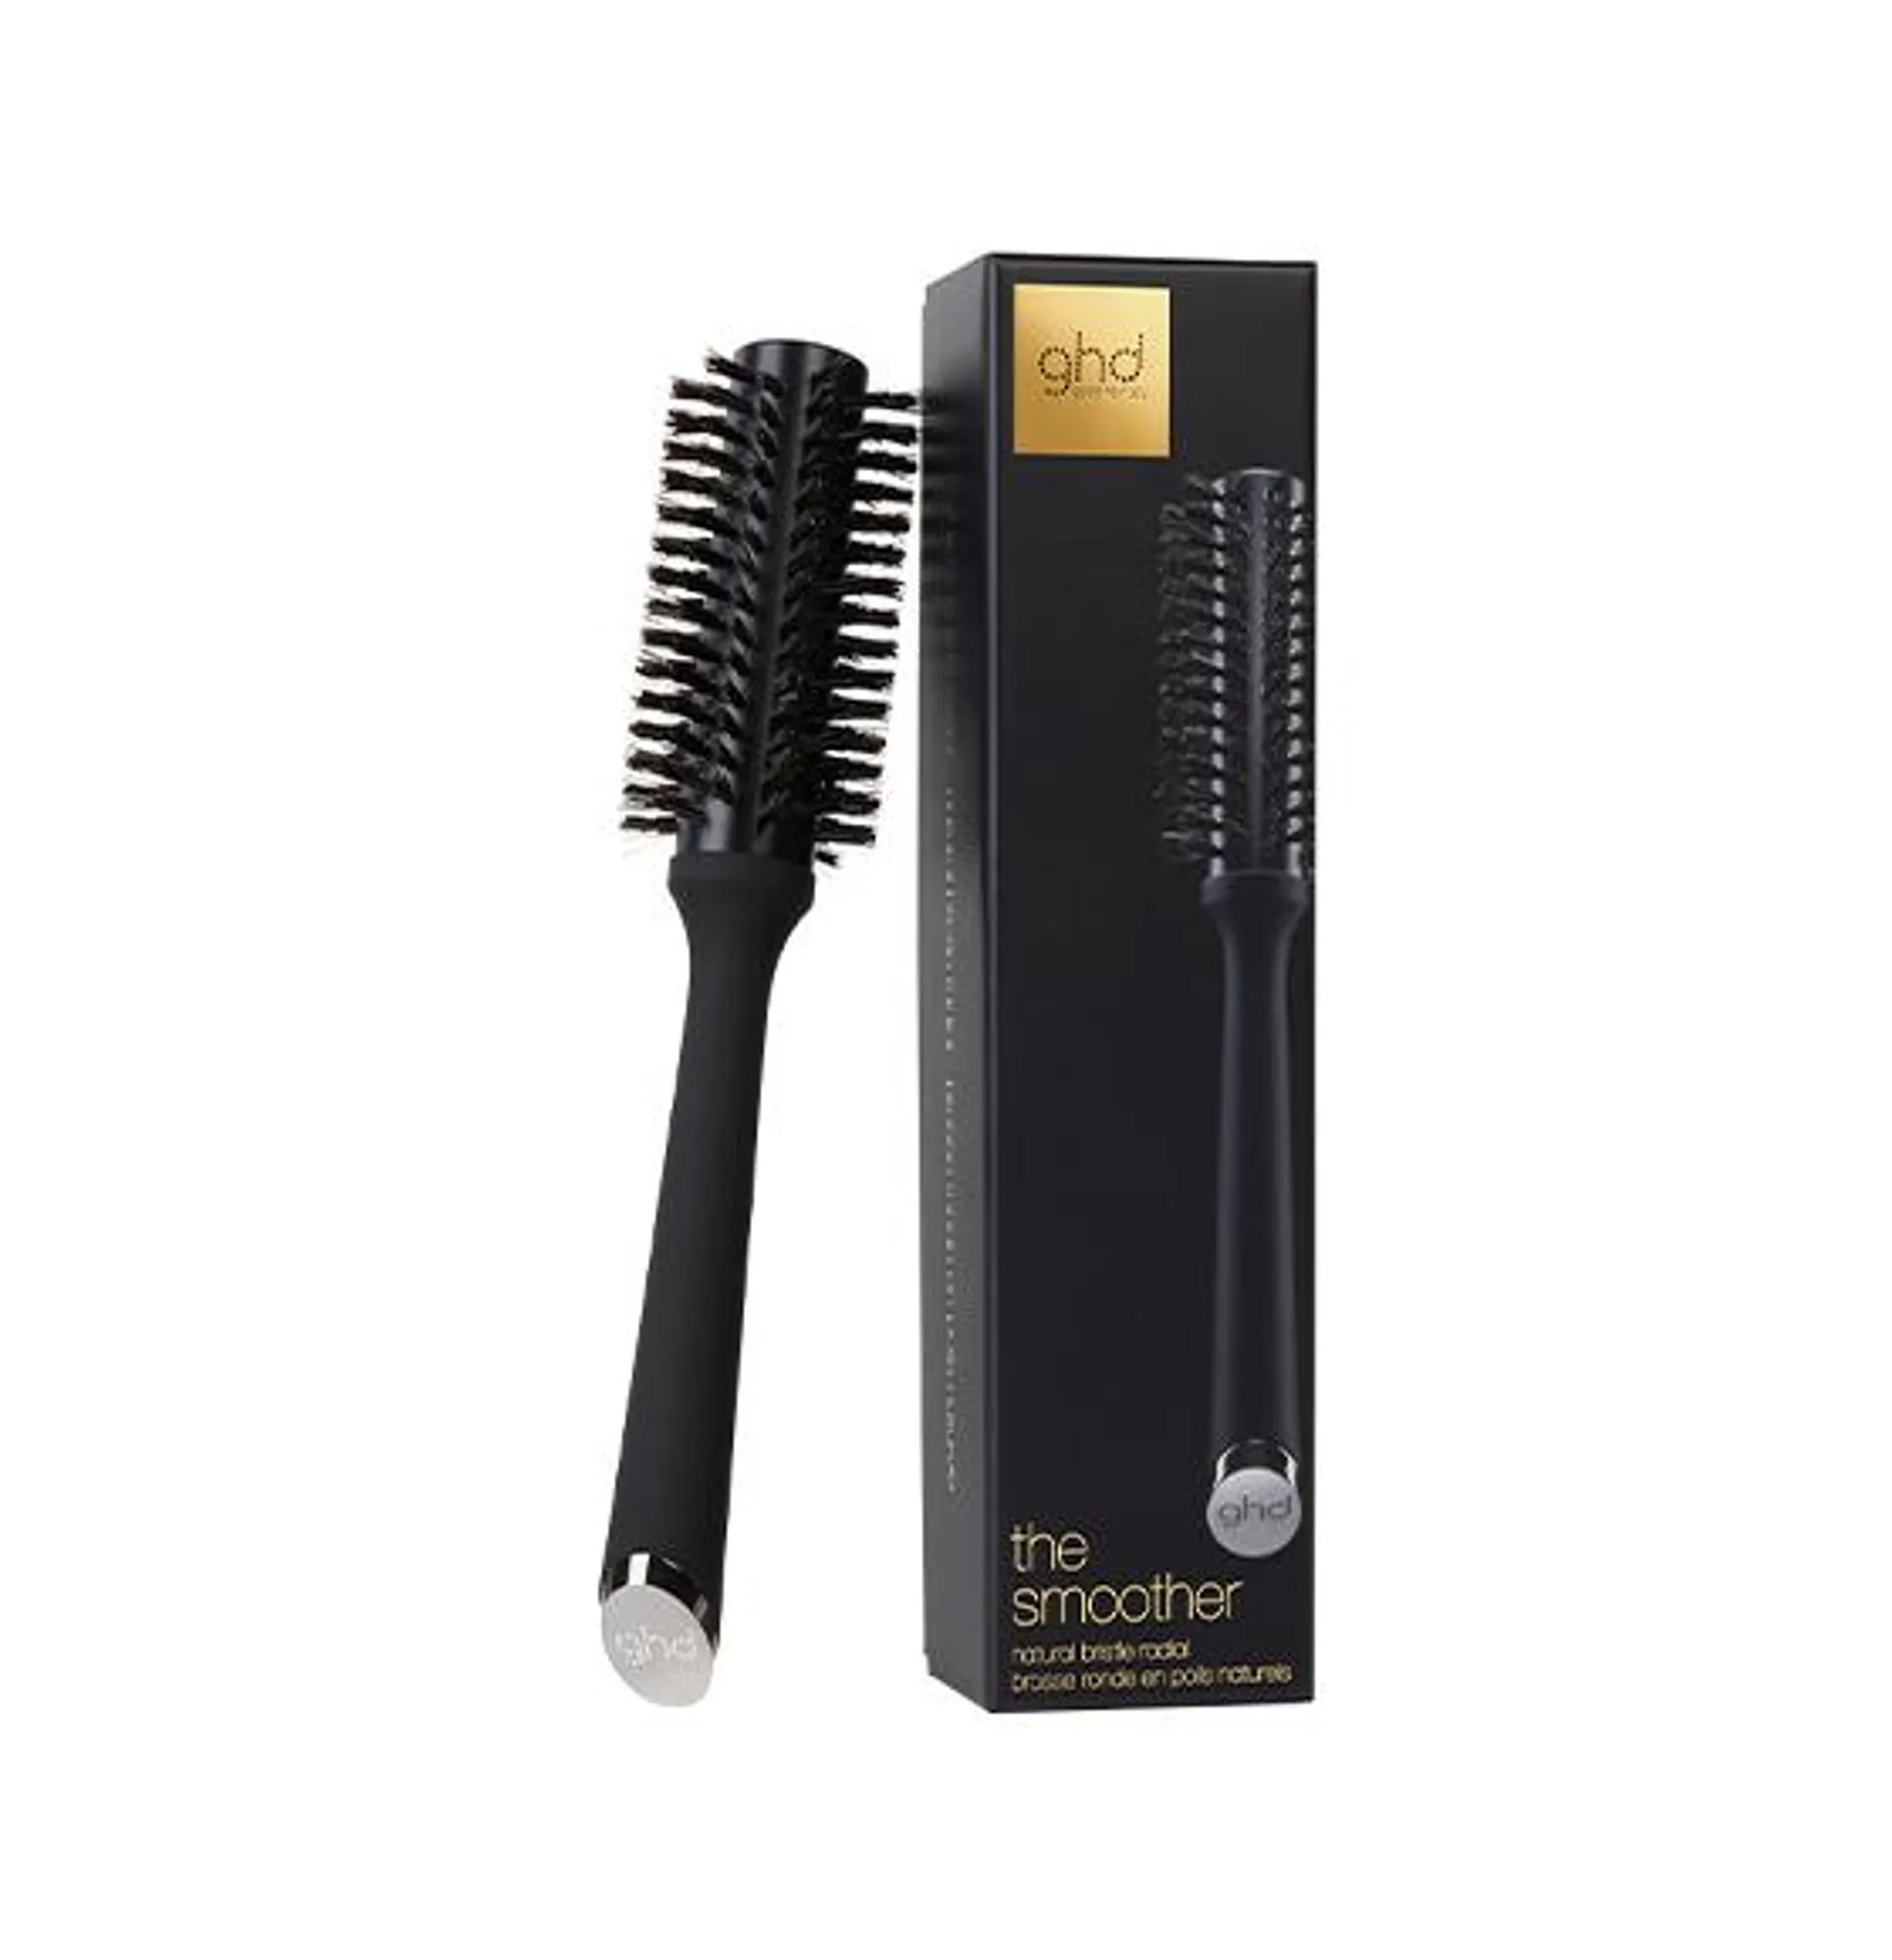 ghd The Smoother Brush Size 2